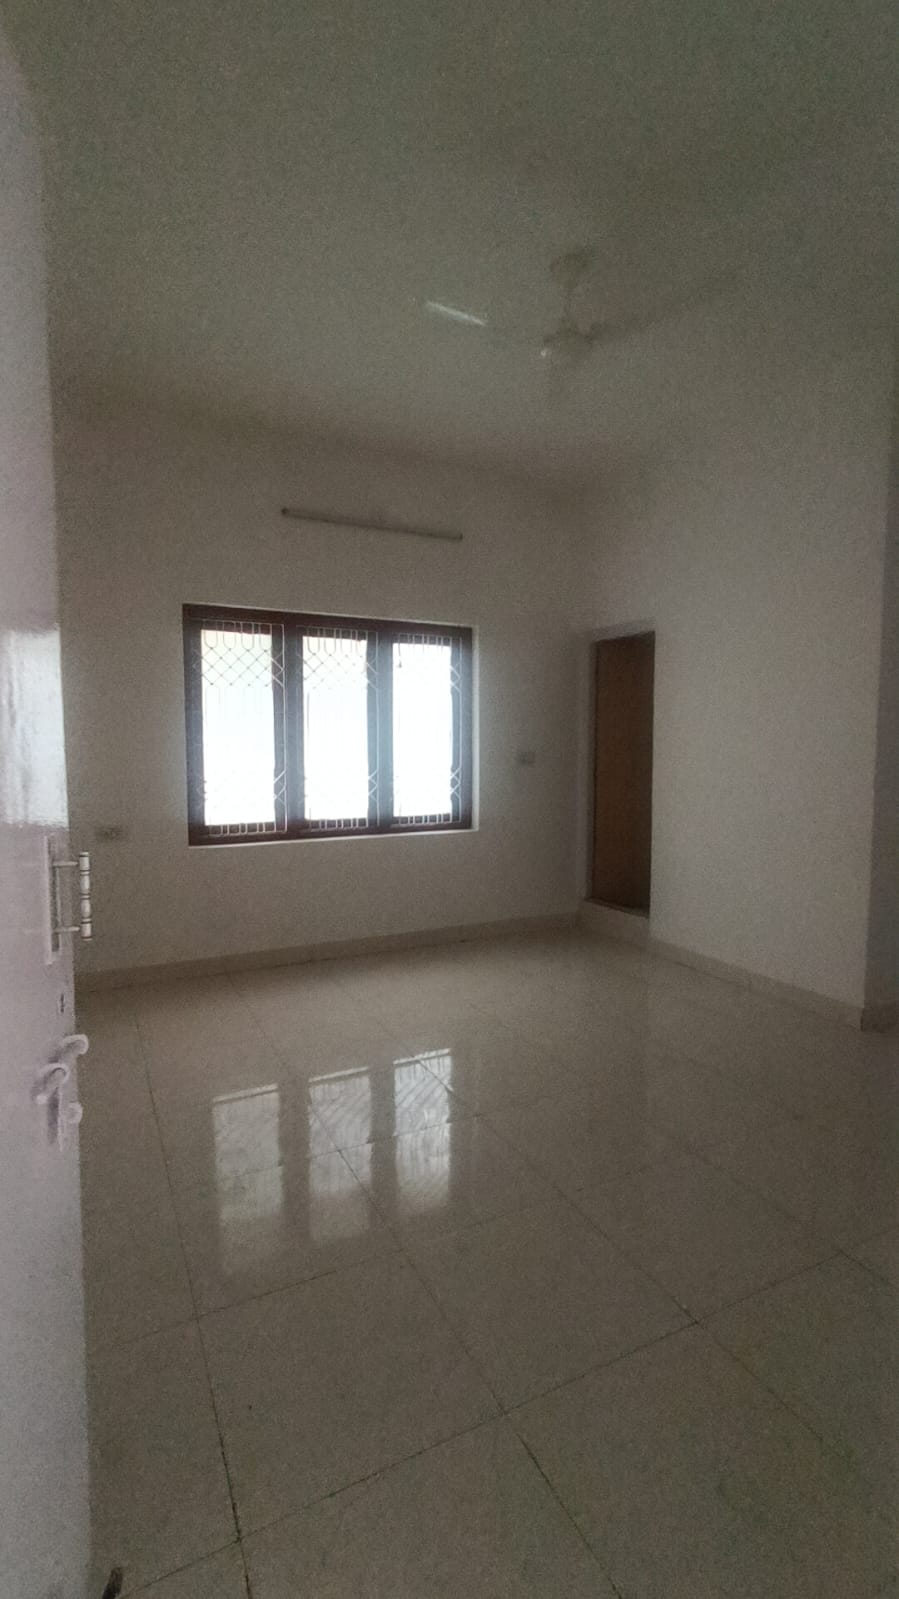 3 BHK Residential Apartment for Lease Only at JAML2 - 2899 in Sultanpete